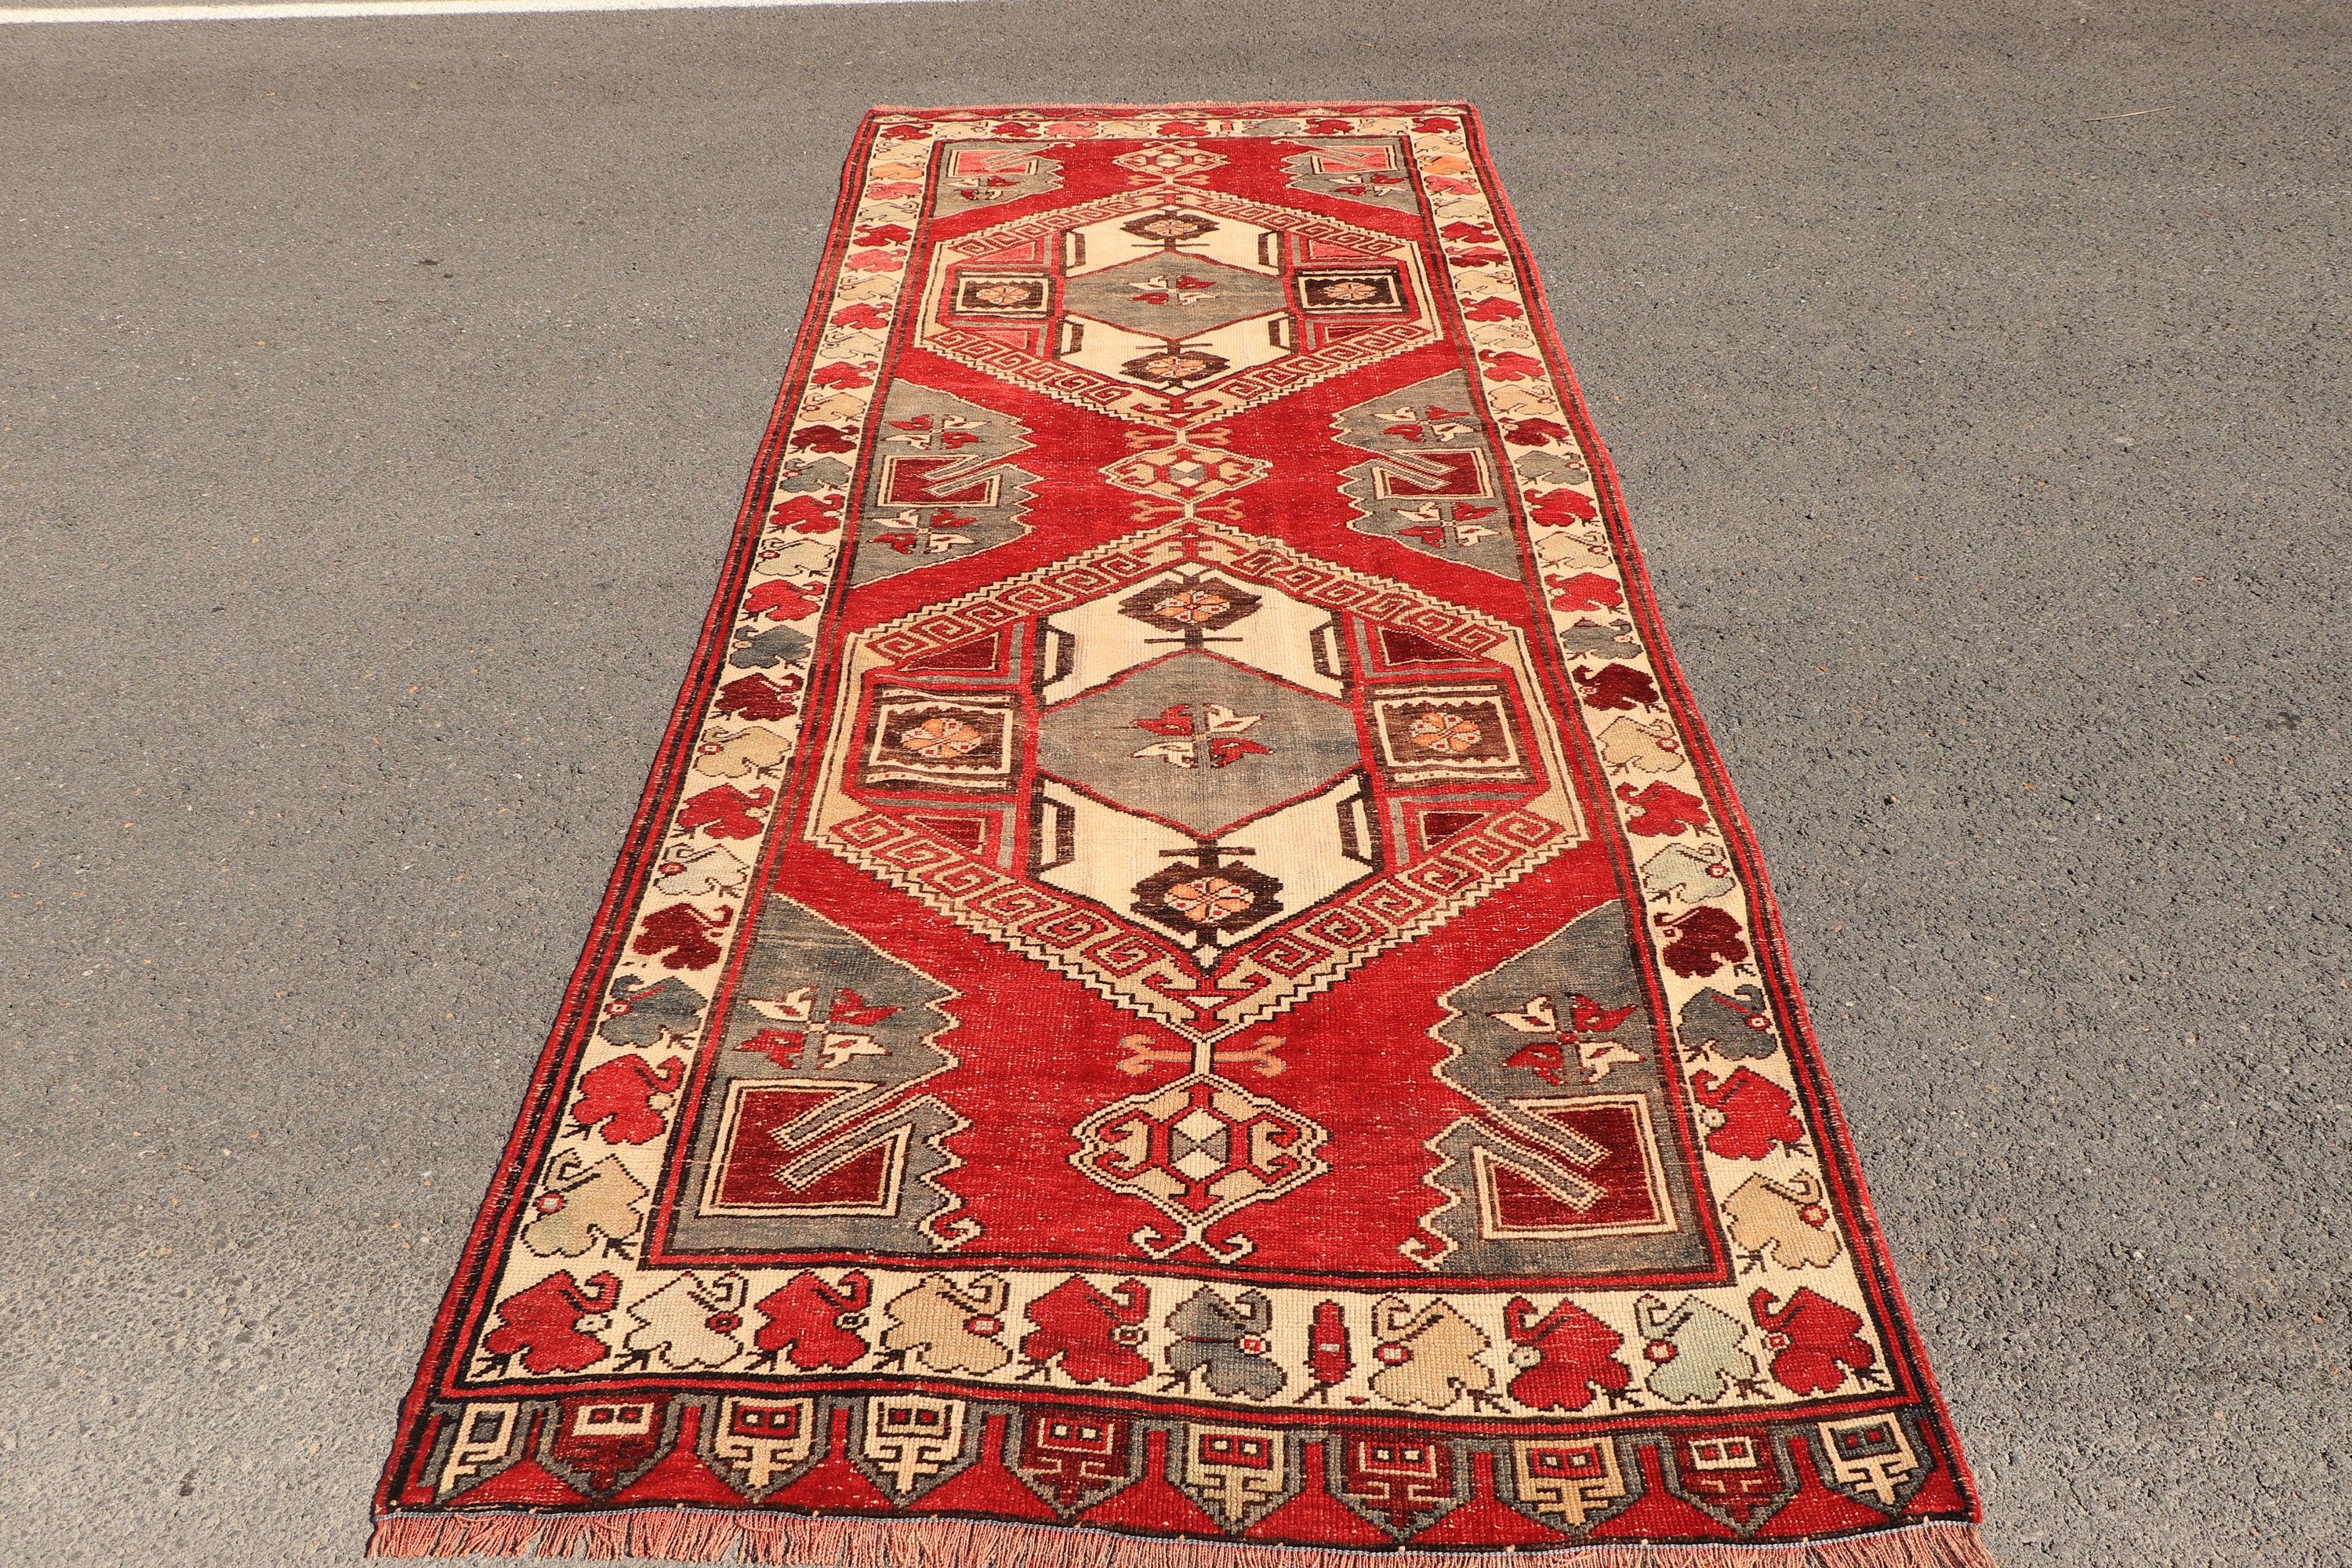 Bedroom Rugs, 4.3x11 ft Runner Rugs, Stair Rug, Vintage Rug, Turkish Rug, Kitchen Rug, Home Decor Rug, Red Moroccan Rugs, Rugs for Kitchen